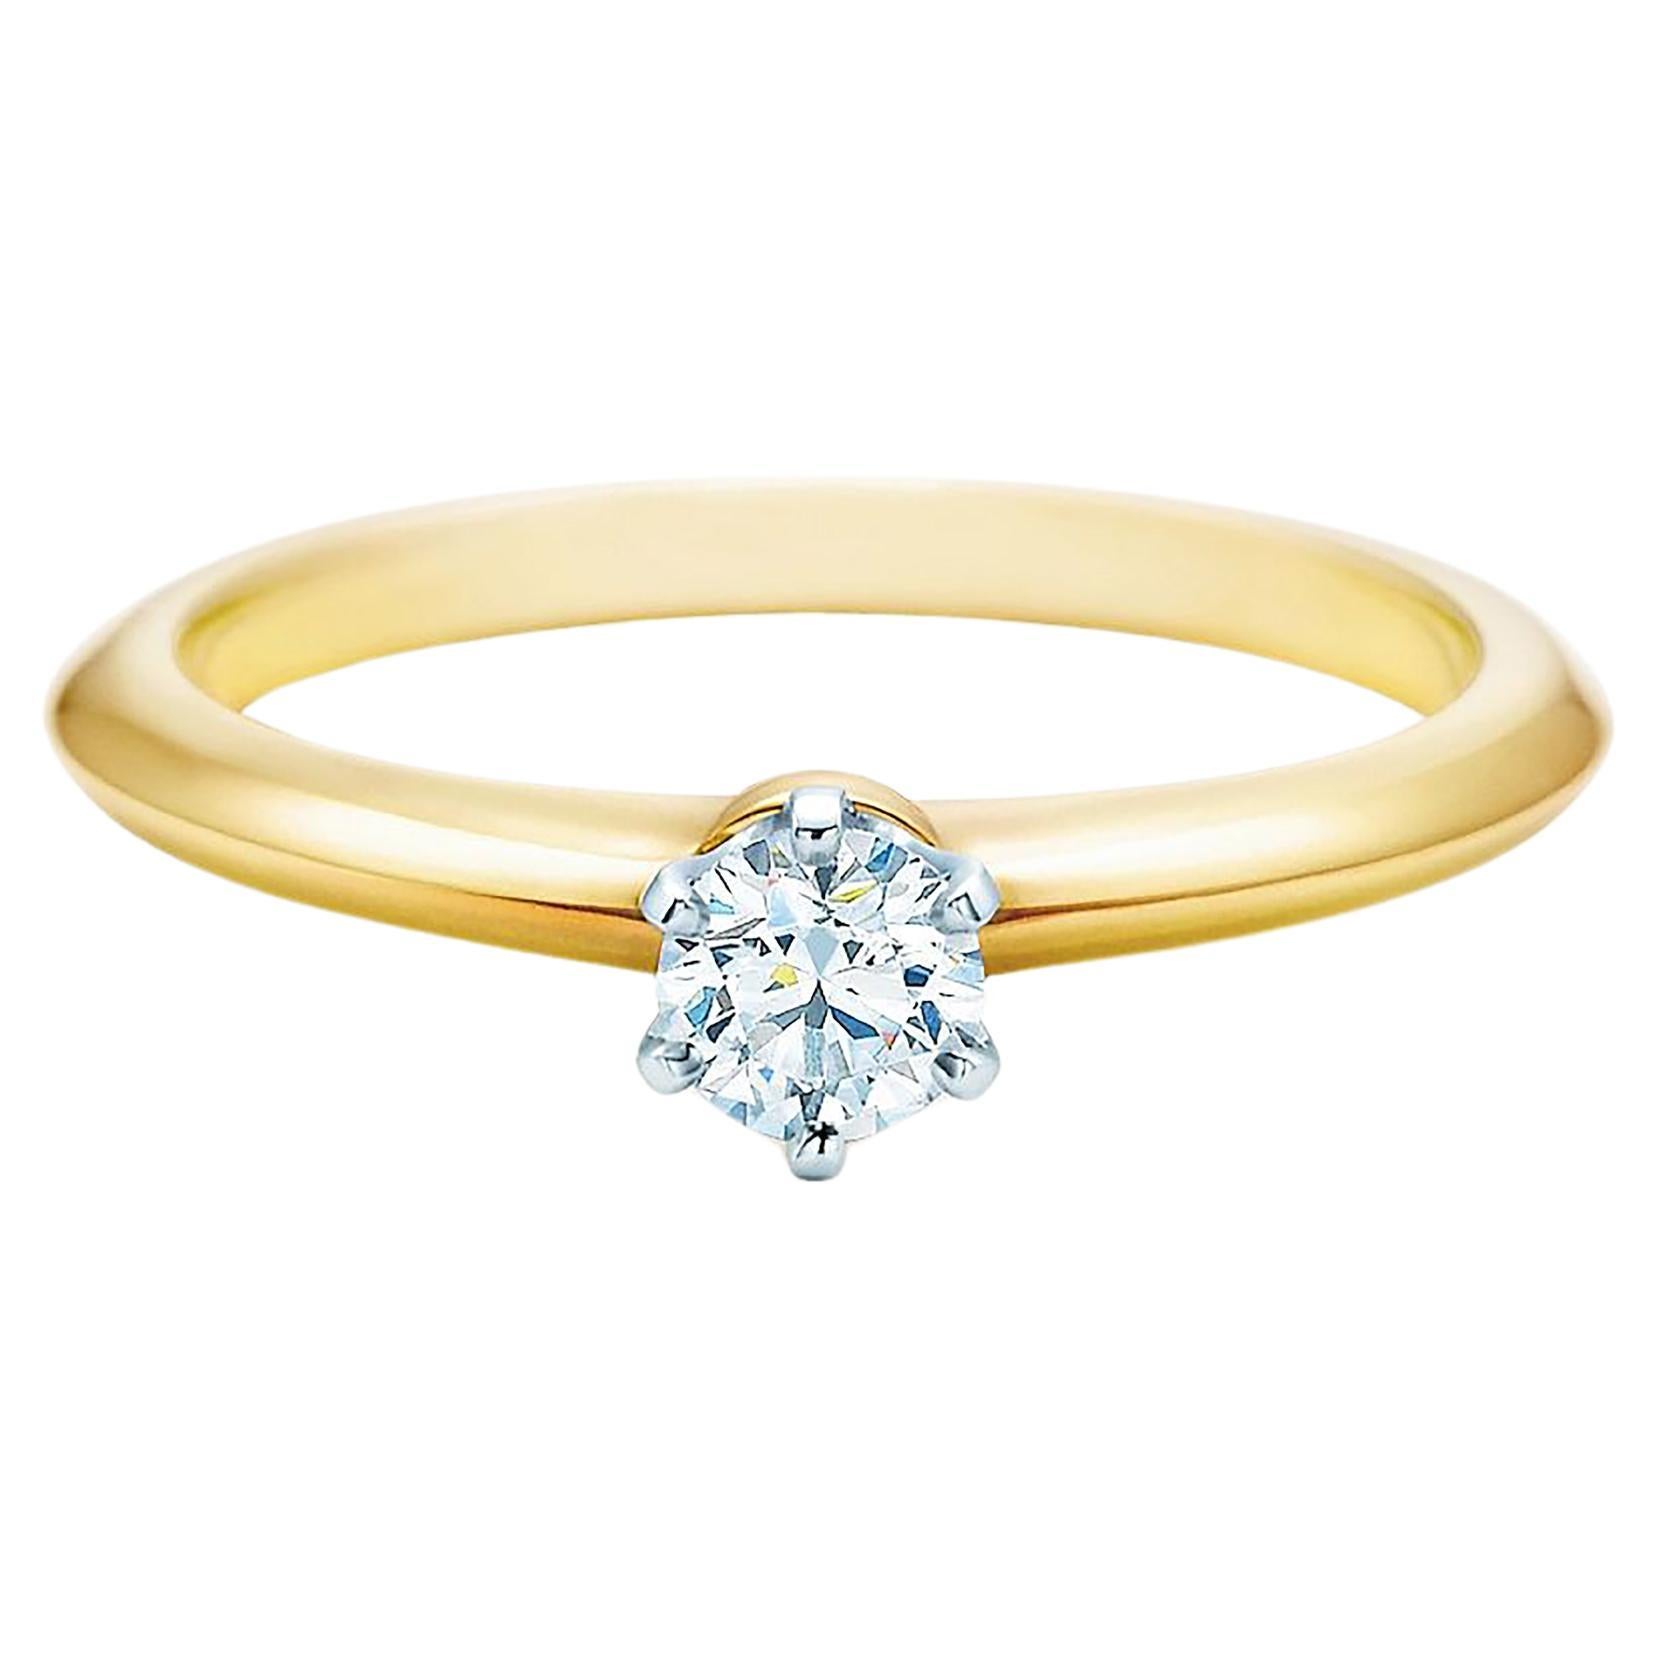 Tiffany & Co. 0.47 carat Diamond Solitaire Ring in 18K Gold For Sale